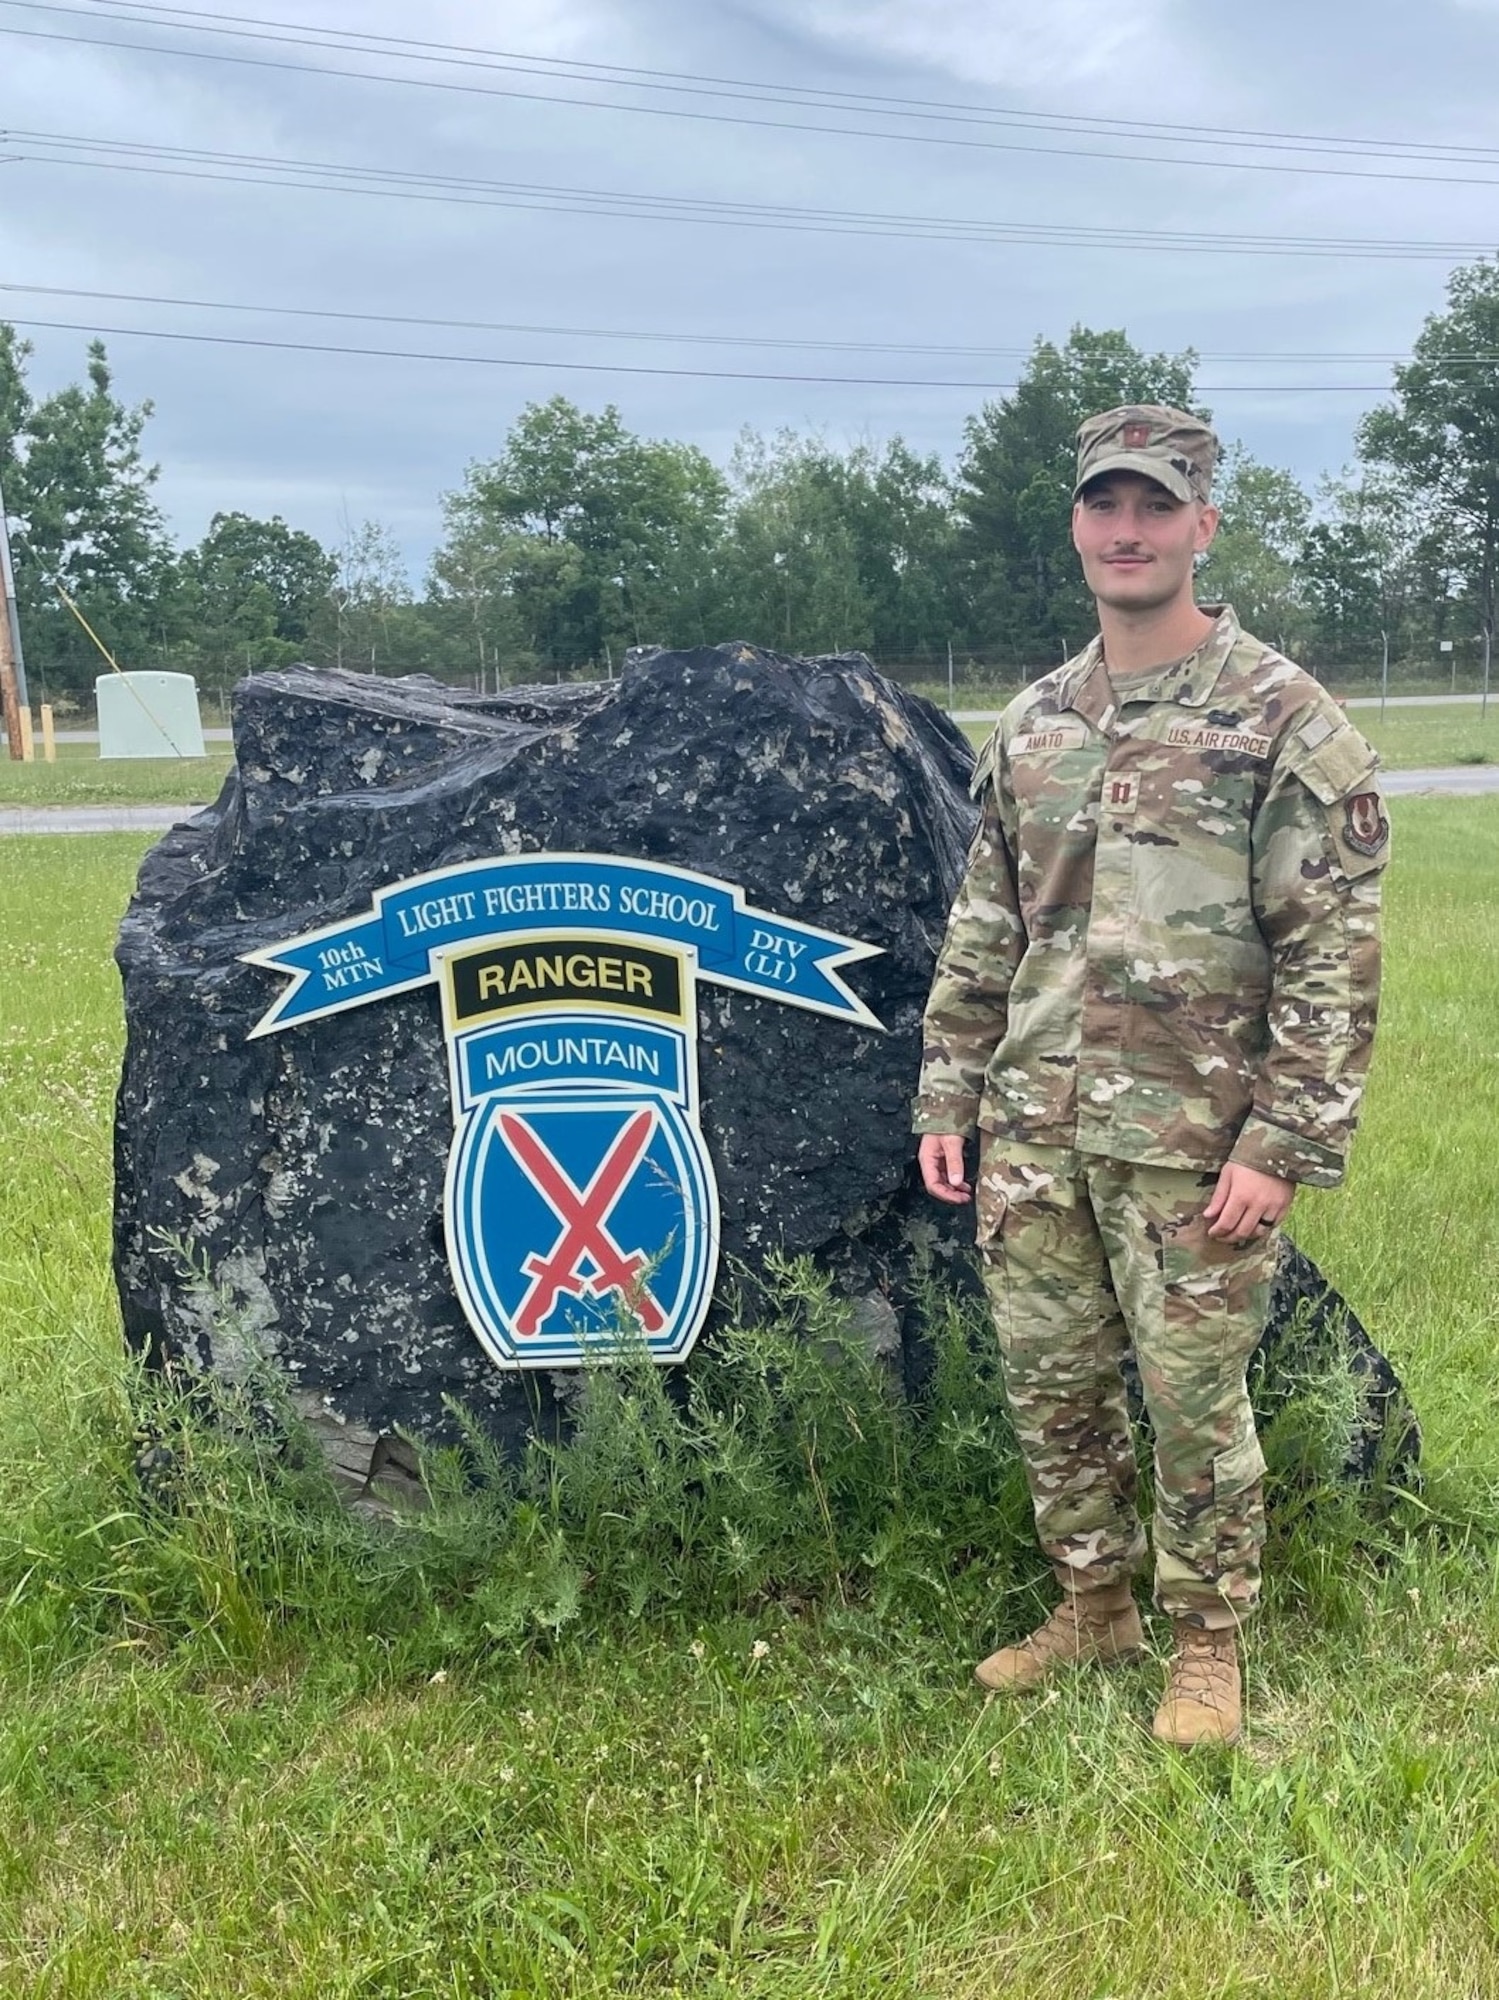 Capt. Evan Amato, Battlefield Airborne Communications Node cost analyst at Hanscom Air Force Base, Mass., stands in front of the Light Fighters School sign at Fort Drum, New York. In June, Amato earned his Air Assault wings after completing U.S. Army Air Assault School. (Courtesy photo)